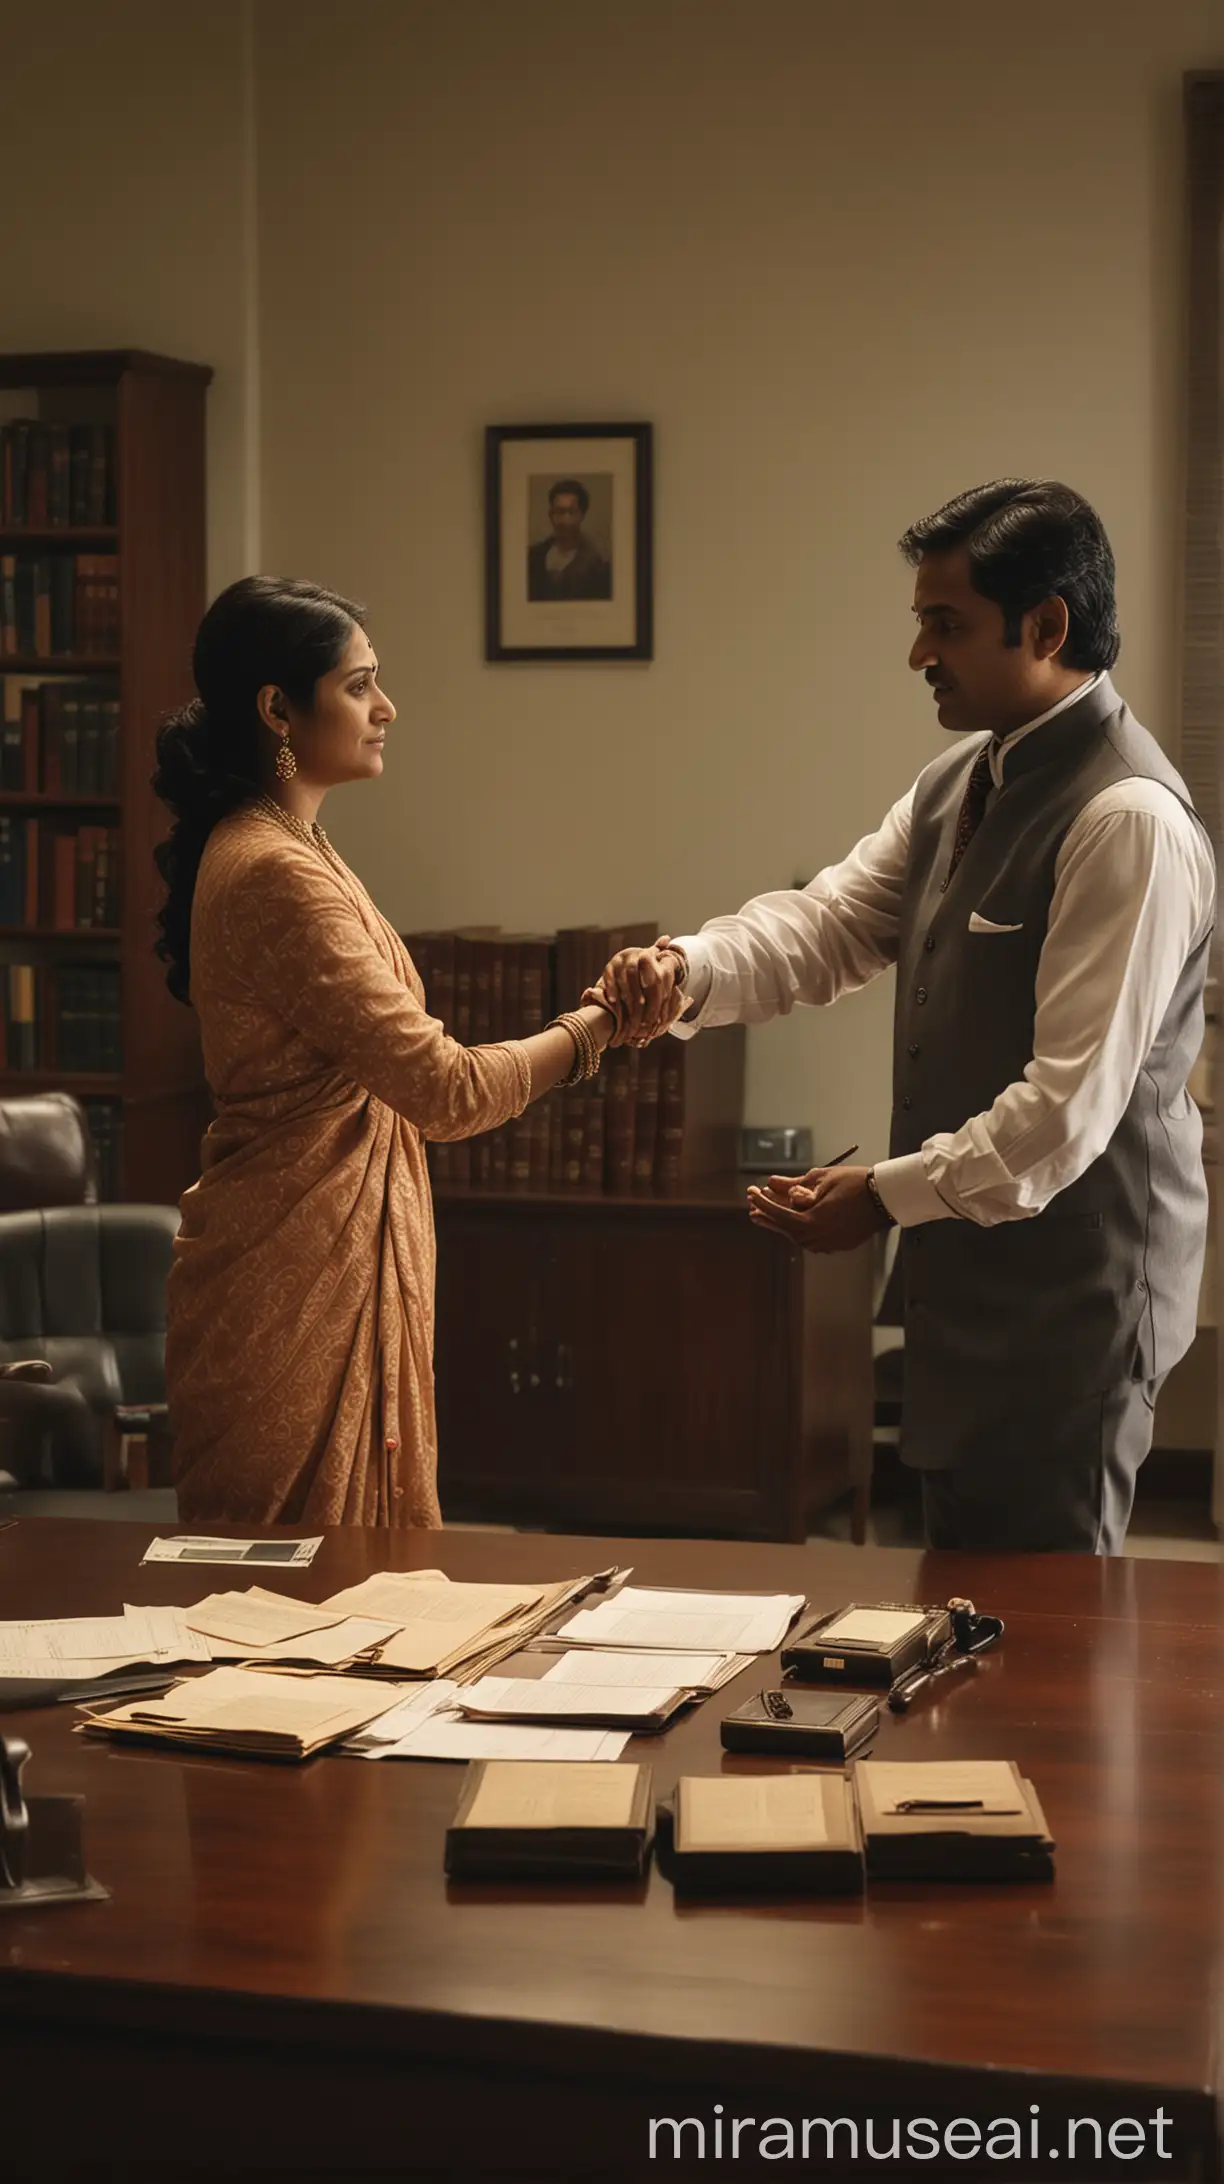 The image poignantly captures the moment an Indian man hands over all his property to his wife due to a divorce. The scene is set in a dimly lit, formal office, perhaps a lawyer's or notary's office, symbolizing the legal proceedings involved.

Foreground: